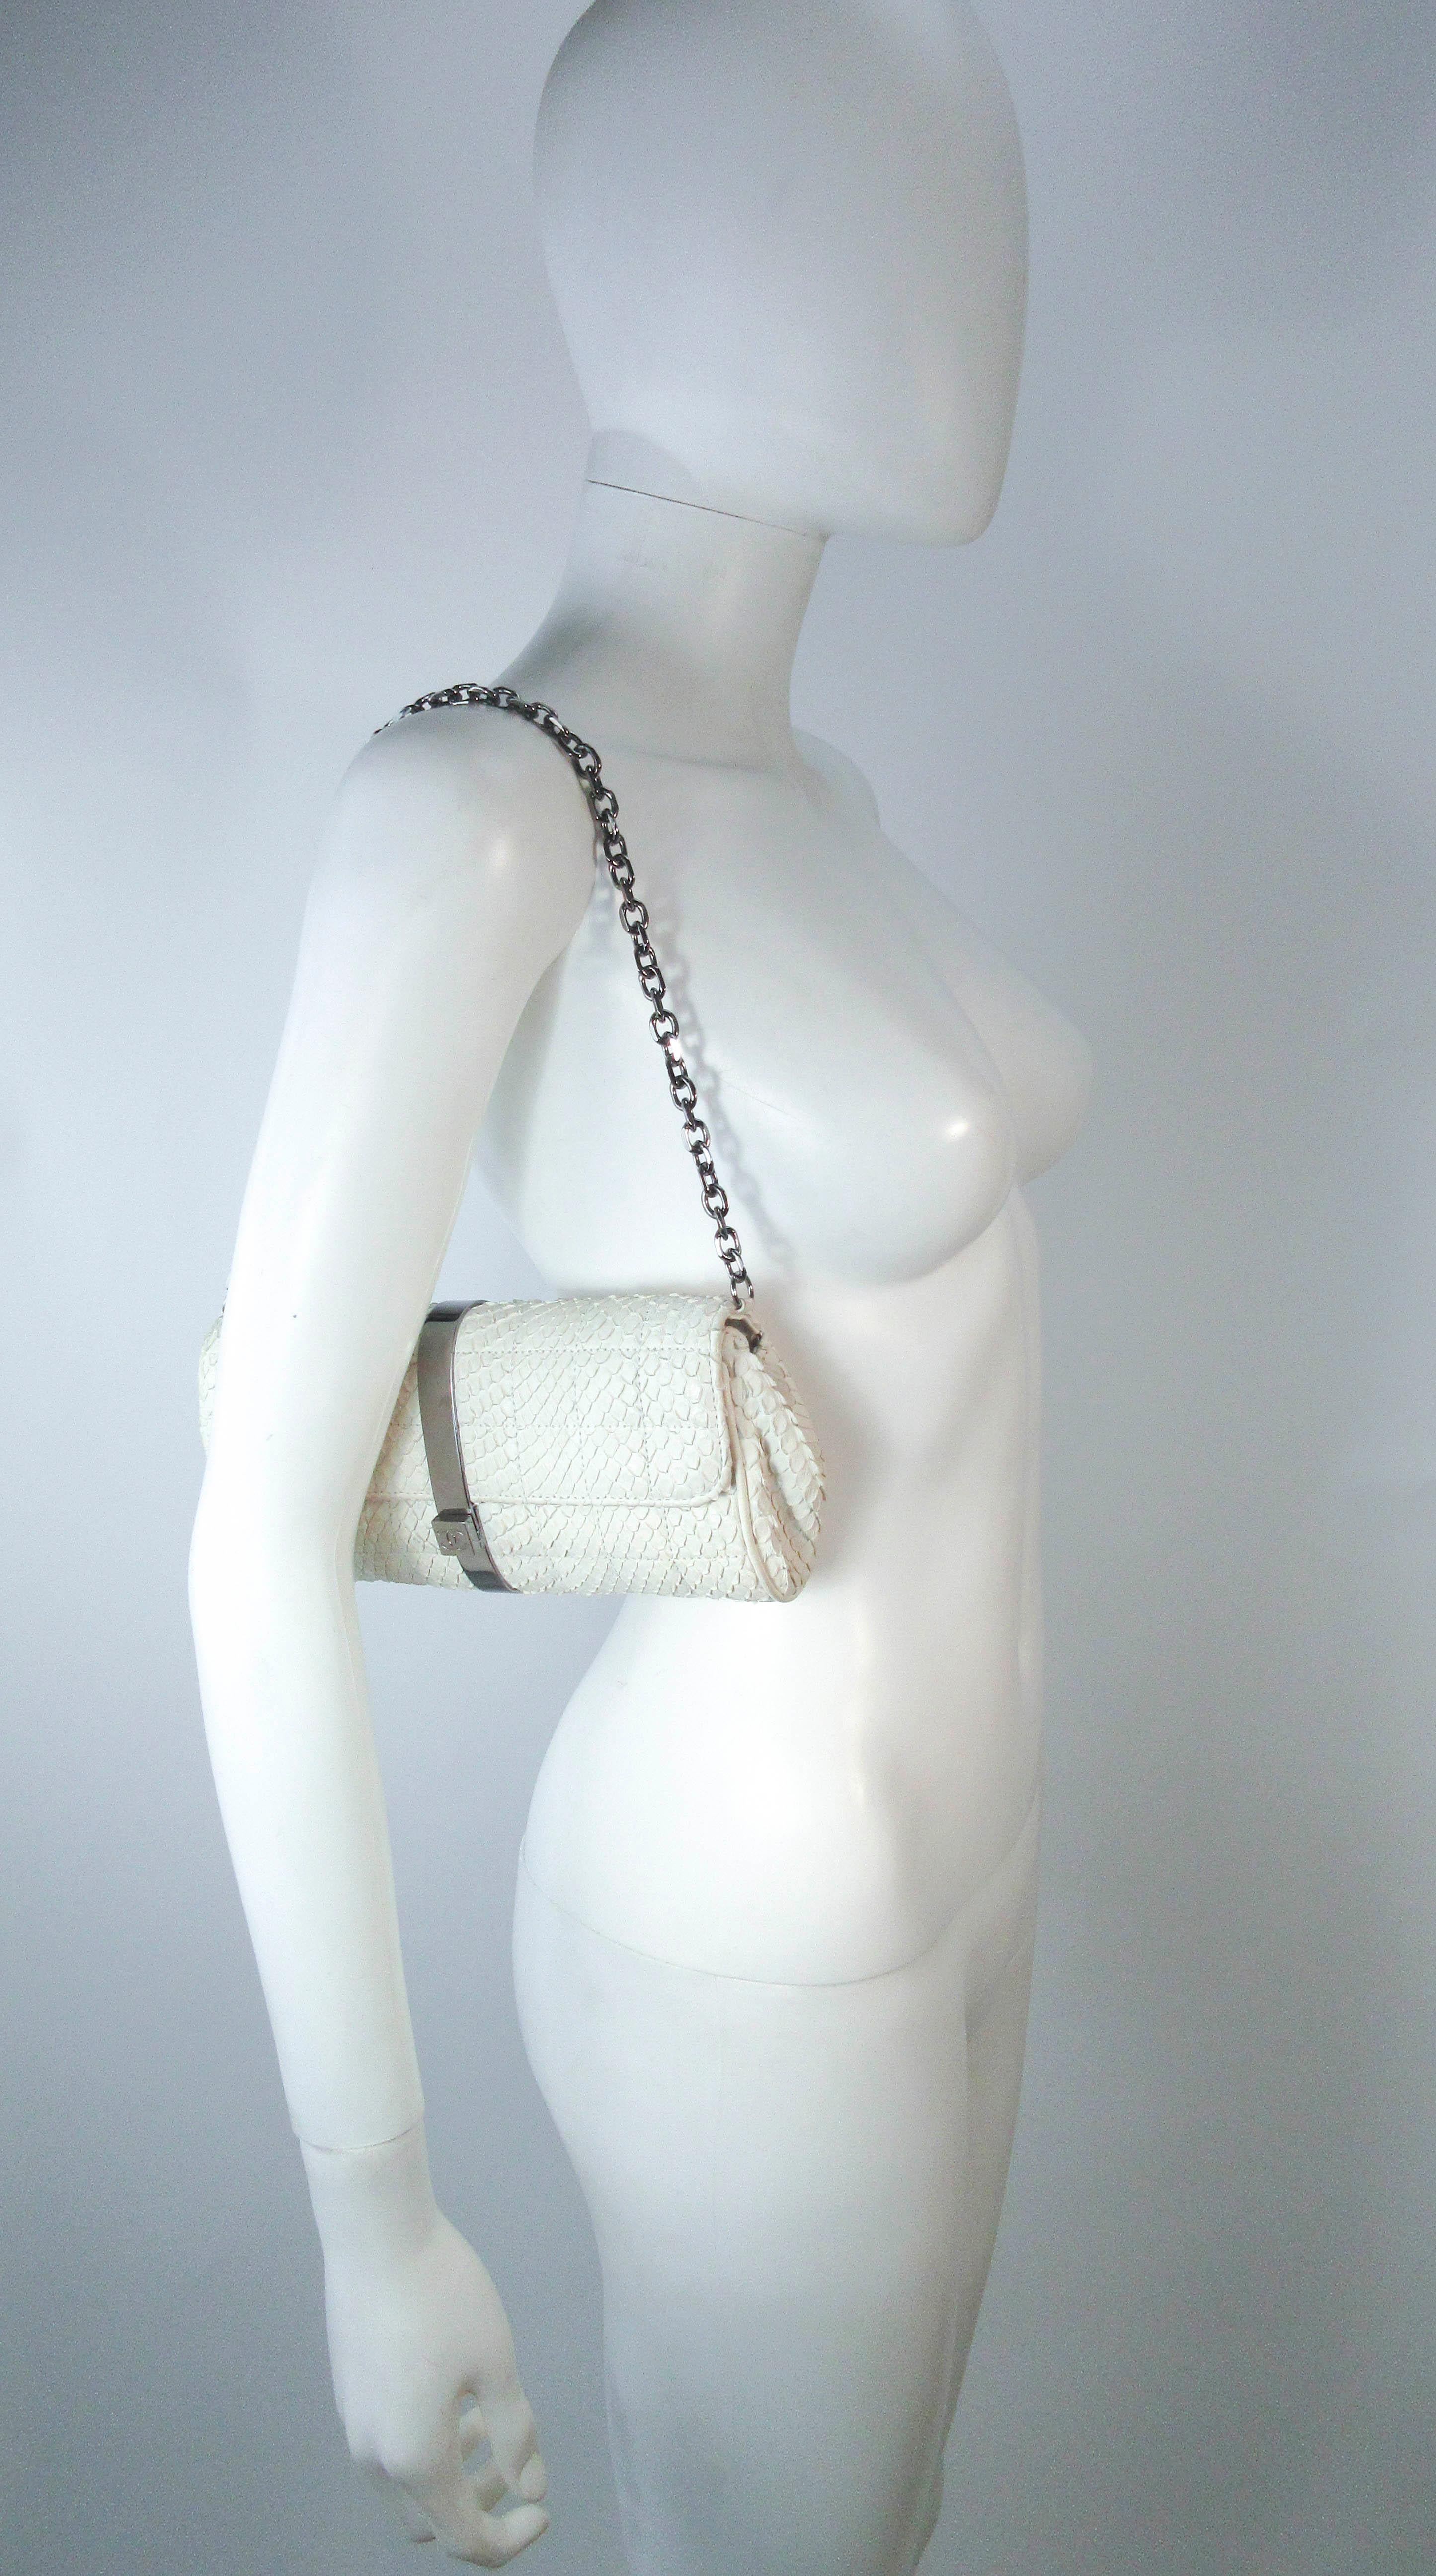 Chanel White Snakeskin Small Chain Clutch Purse with Silvertone Hardware 6